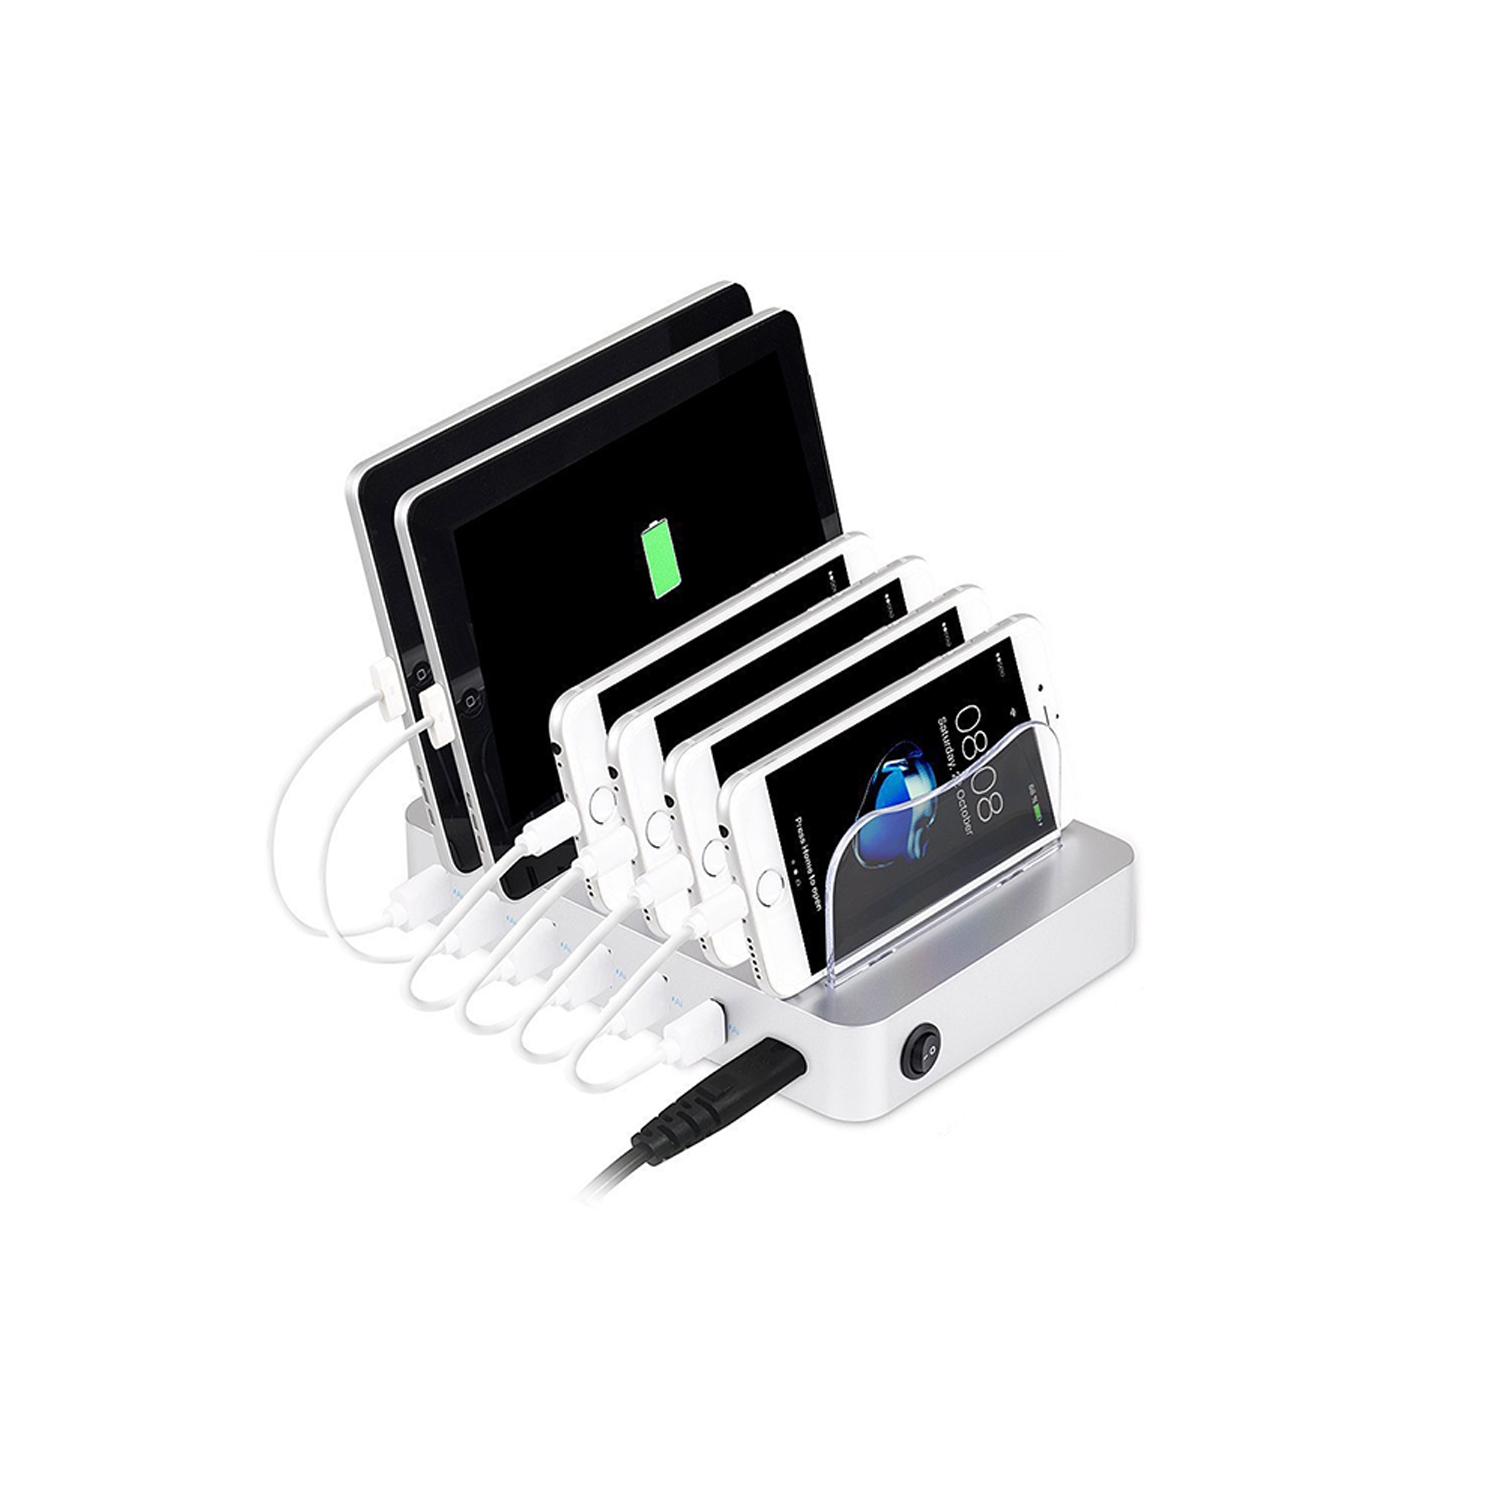 navor Multiple Device Charging Dock with 6 USB Ports and 6 Mix Short Cables, Multiport Fast Charging Station, Compatible with iPhone, iPad, Android, Tablets and More -Silver